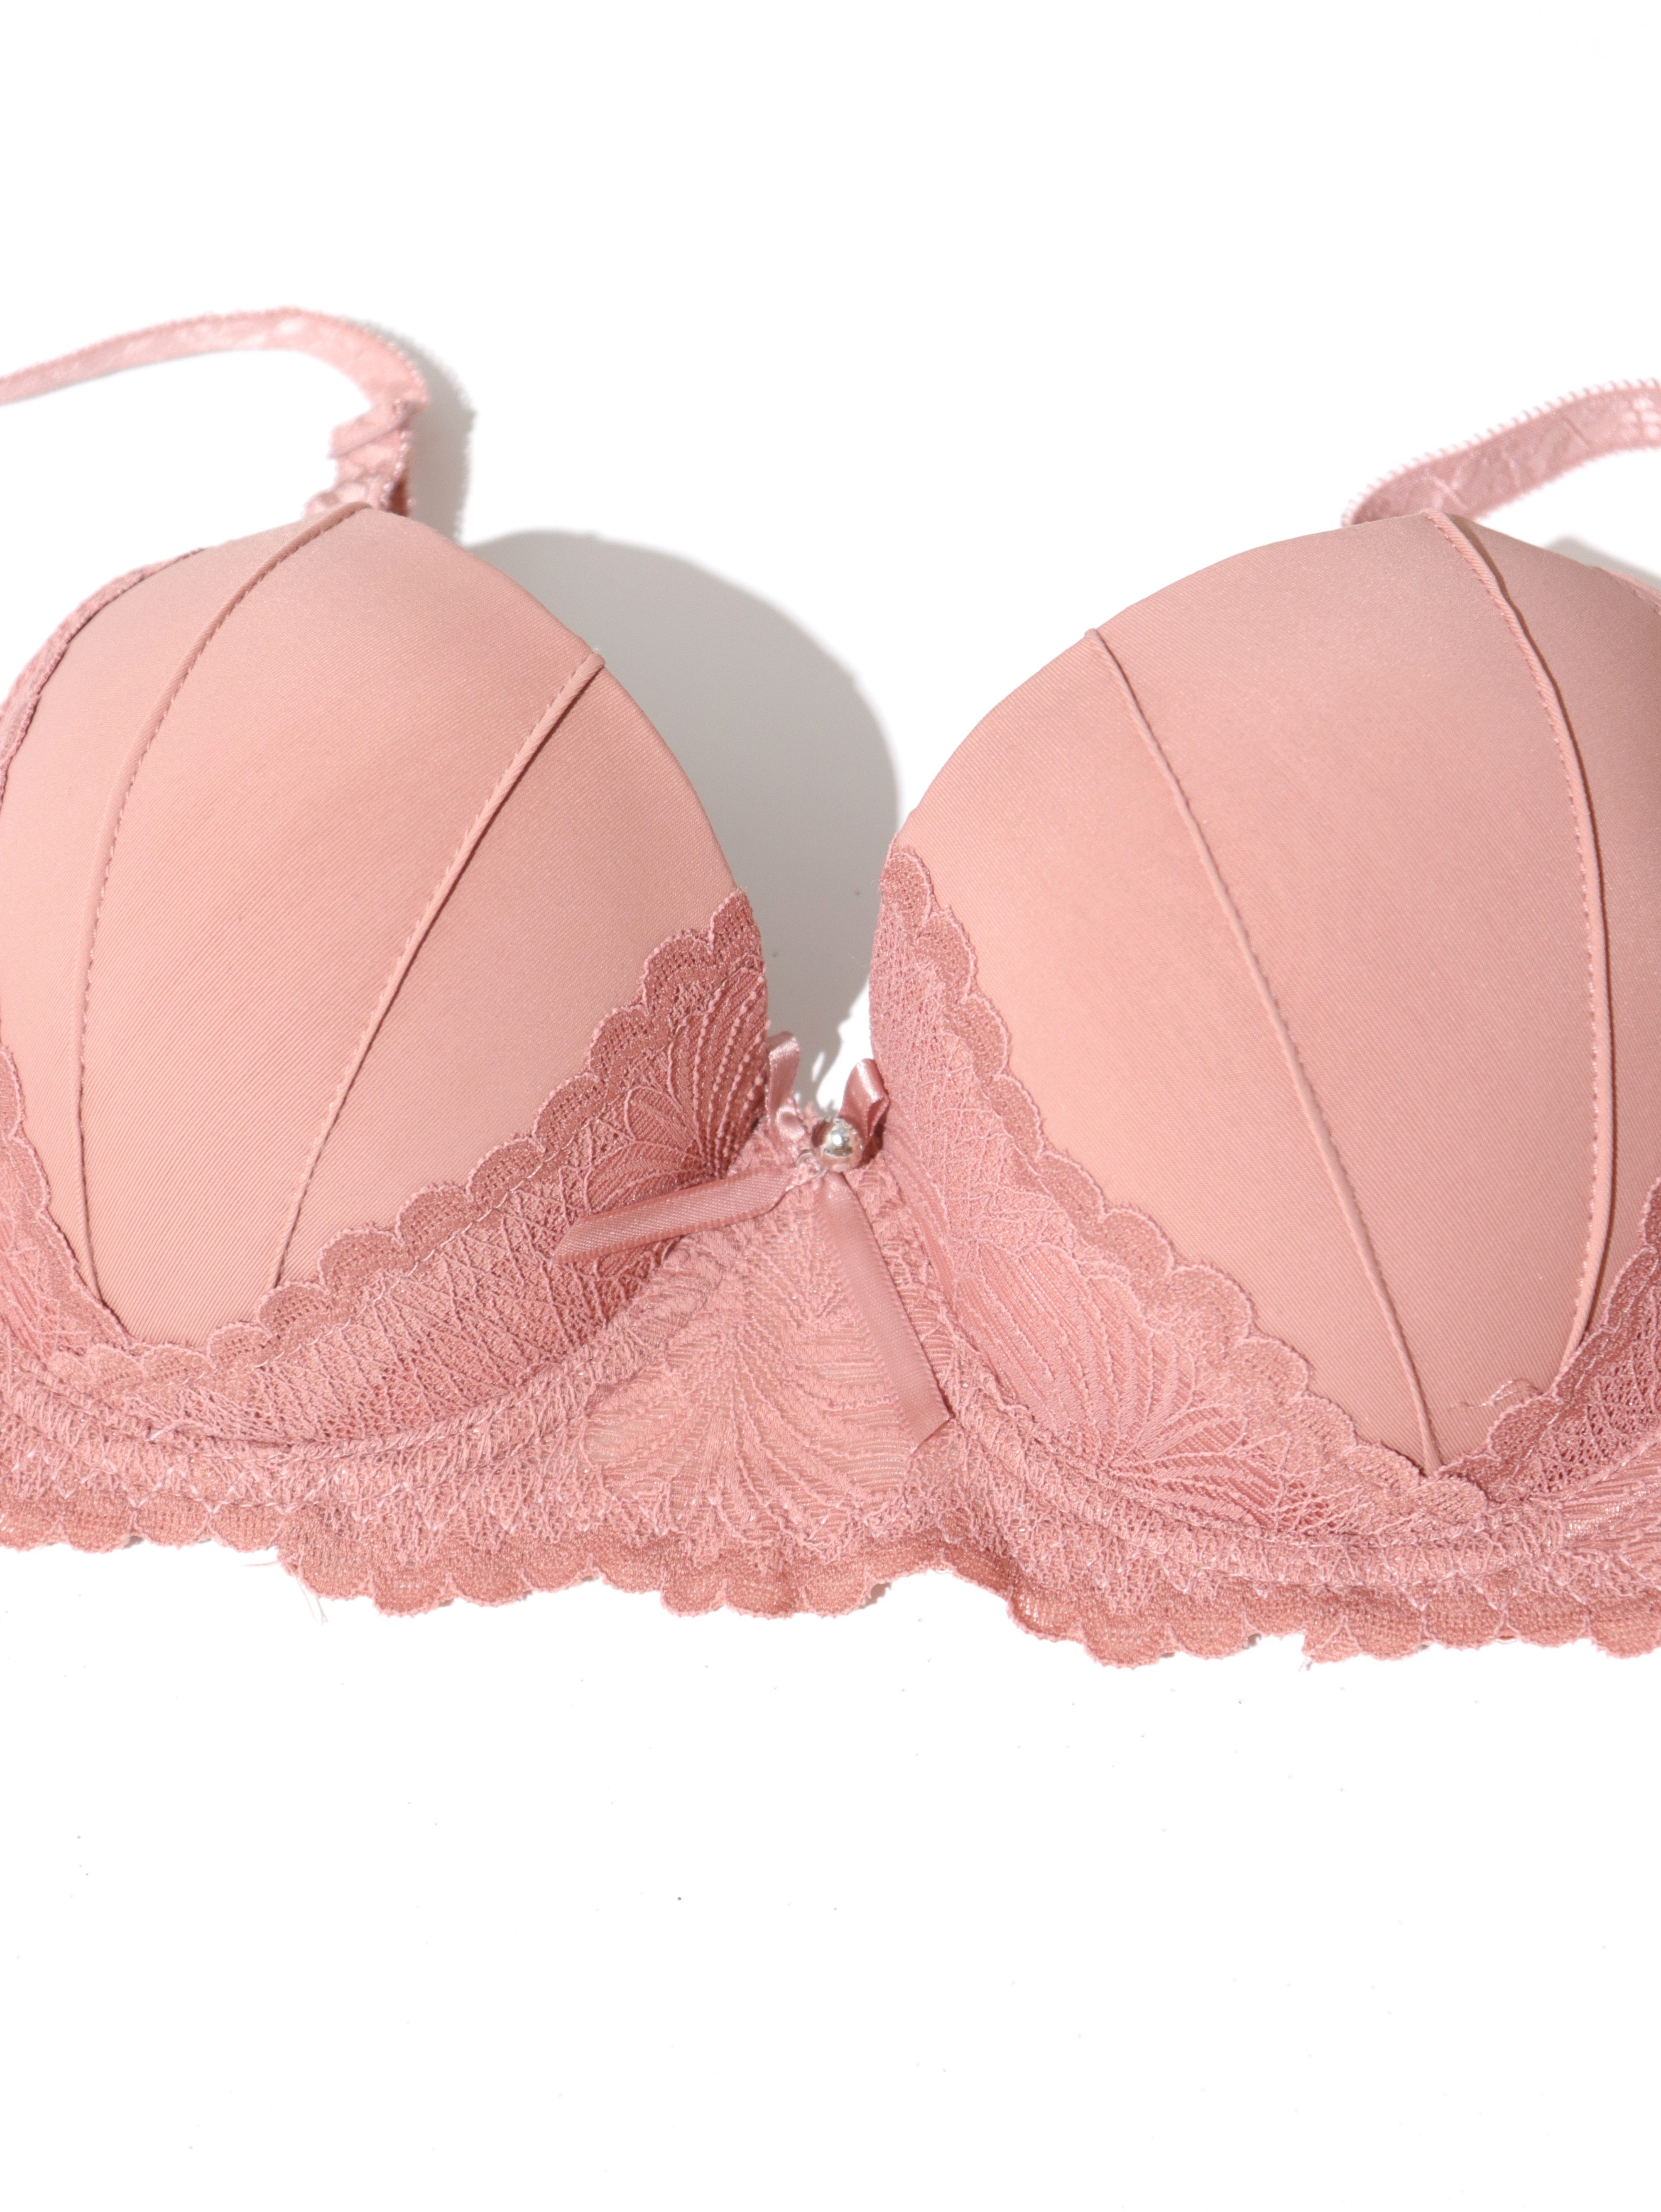 Ardene Contrast Lace Push-Up Bra in Light Pink, Size 34C